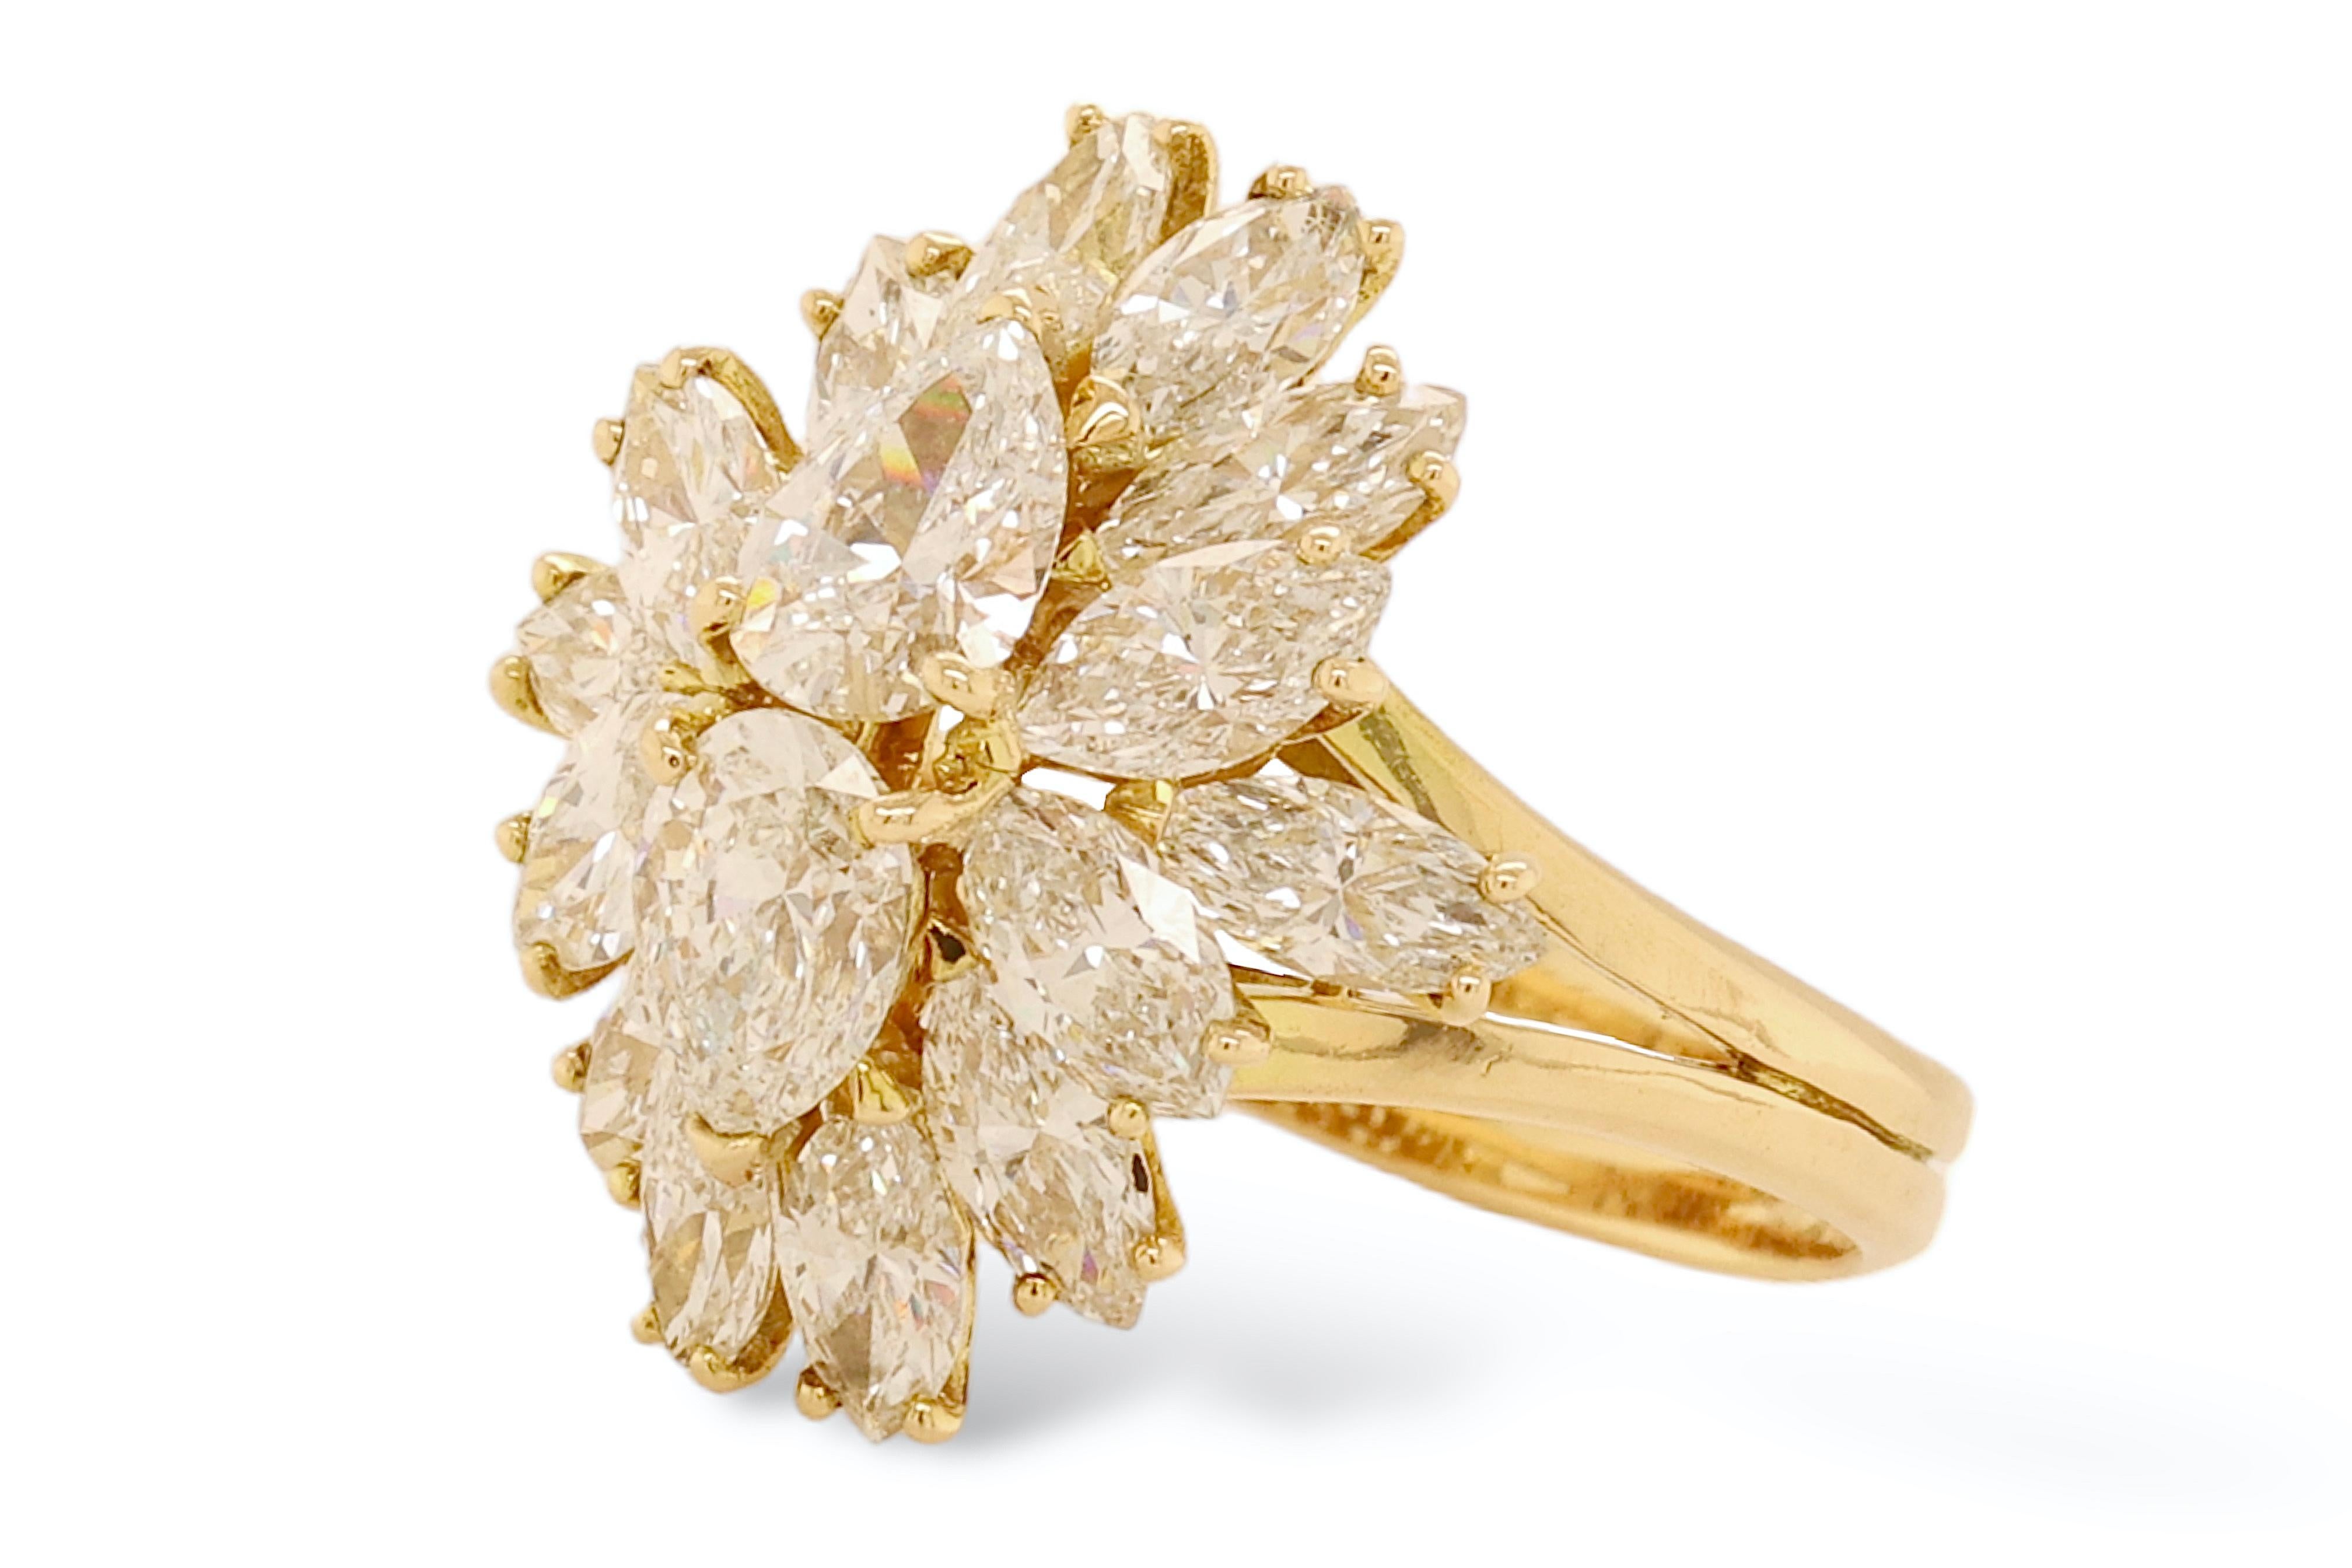 Women's or Men's Asprey London 18kt. Yellow Gold Ring With 3.23 ct. Pear & Marquise Cut Diamonds For Sale